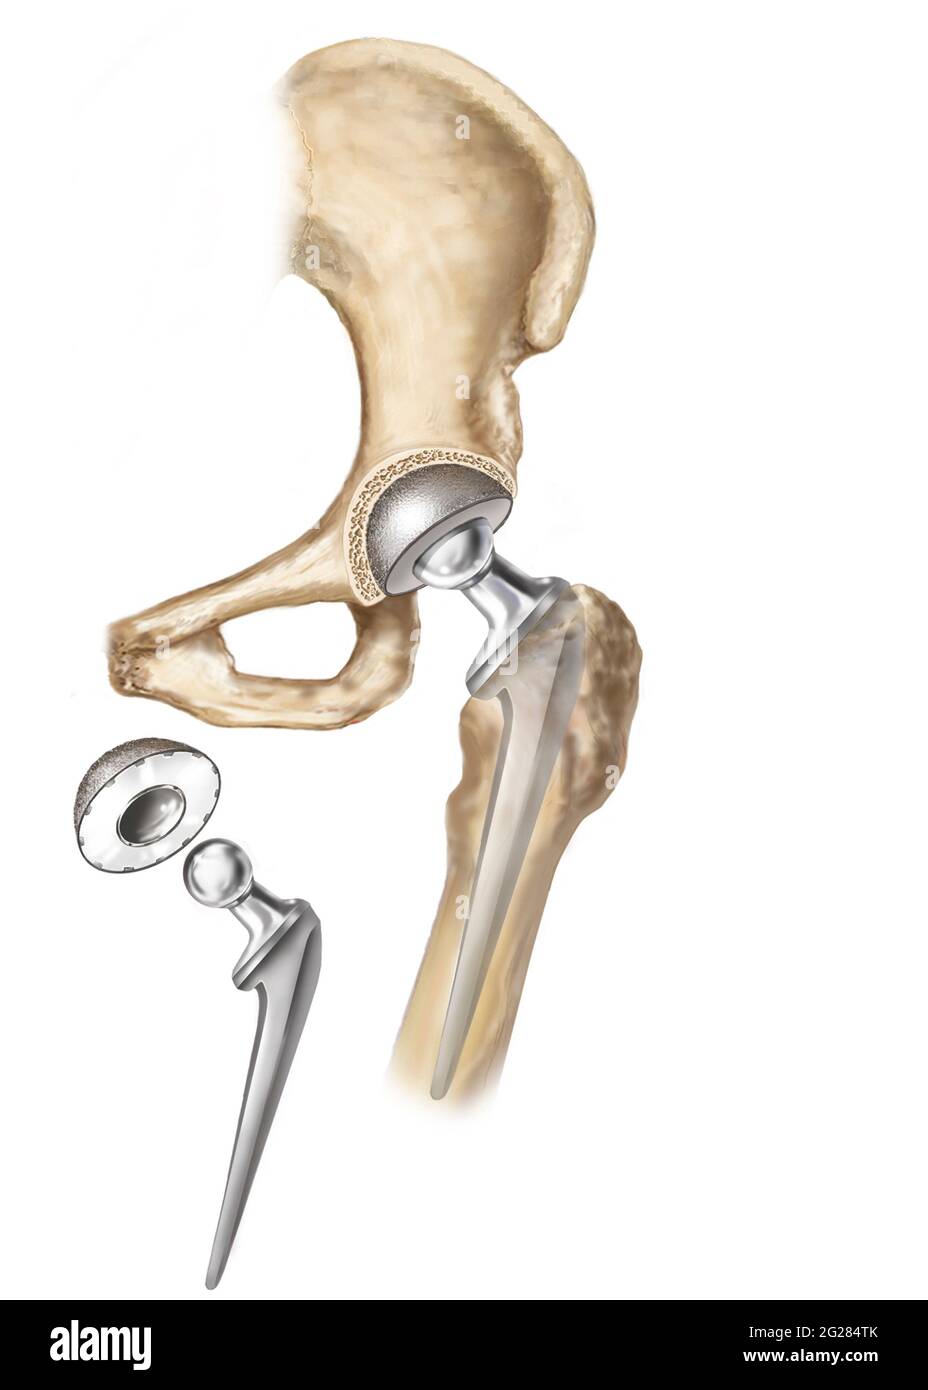 Detail of hip replacemnt. Stock Photo